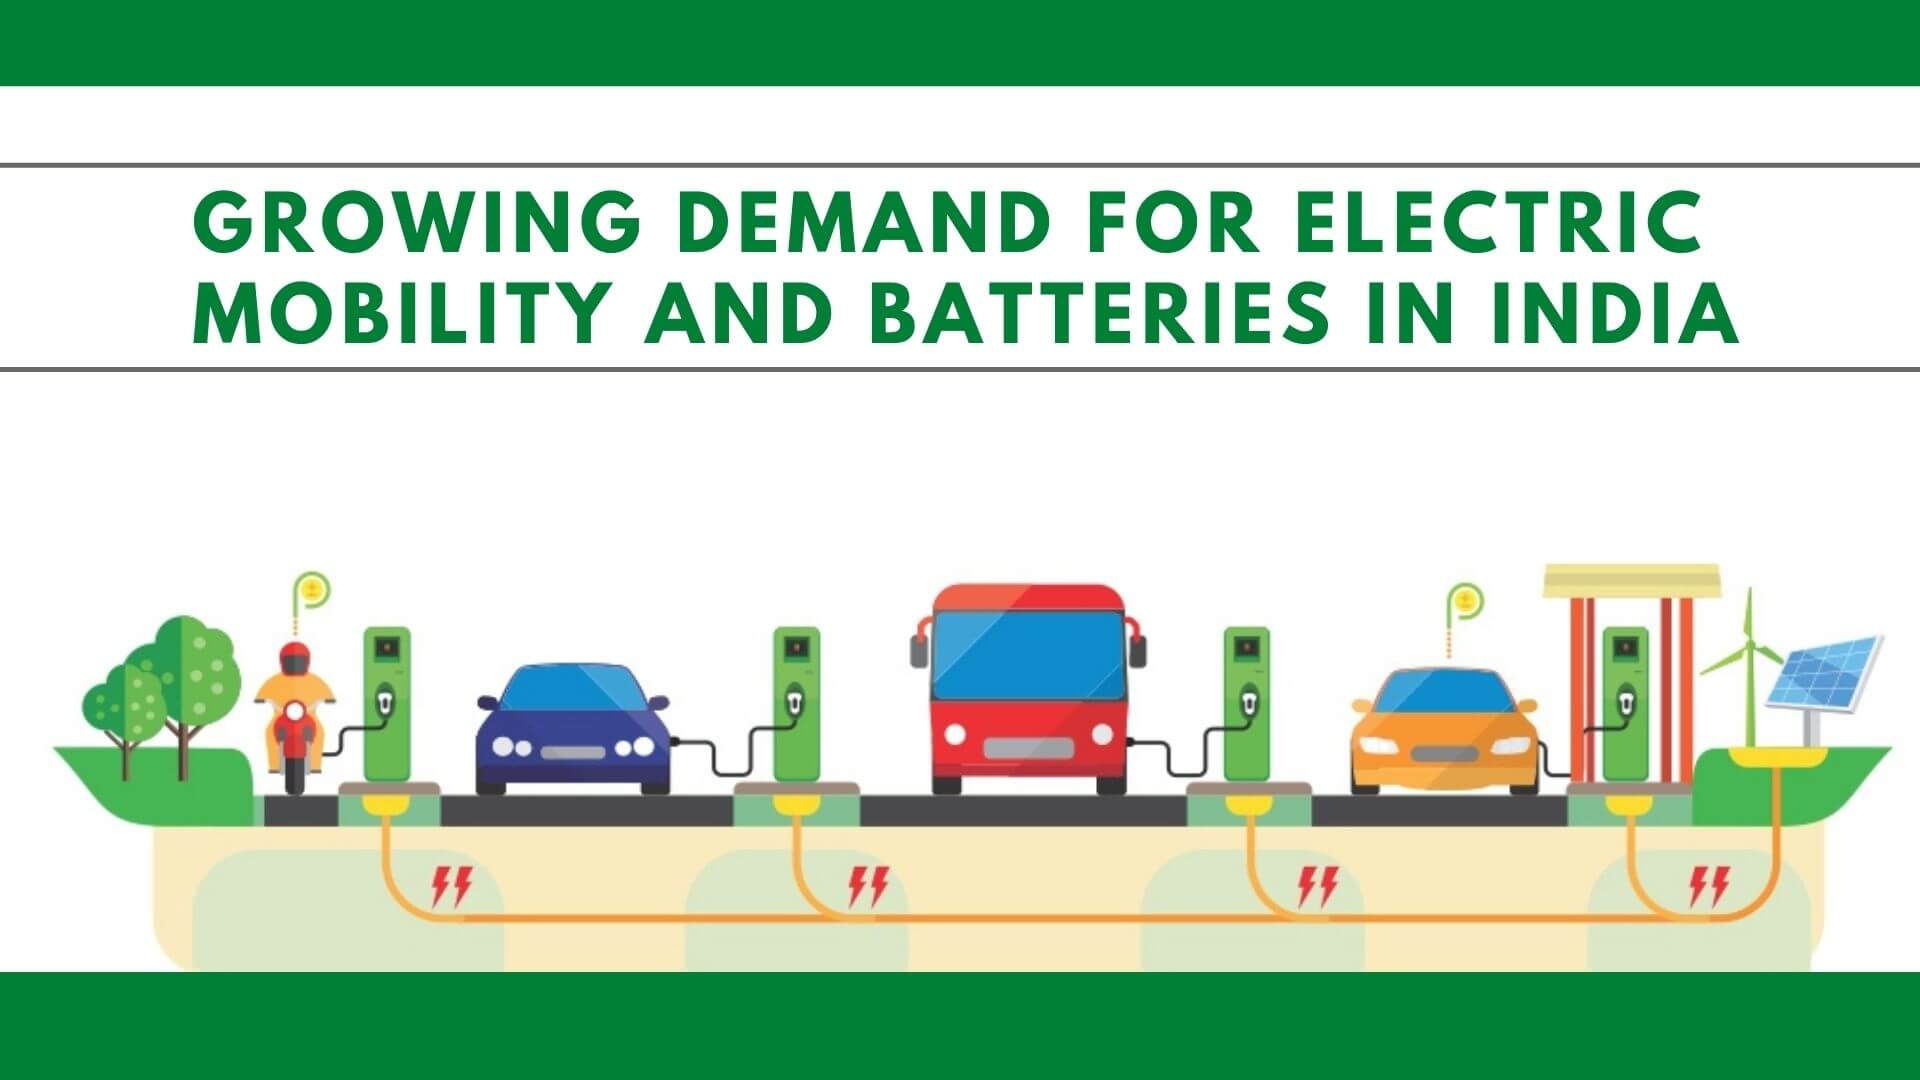 https://e-vehicleinfo.com/growing-demand-for-electric-mobility-and-batteries-in-india/